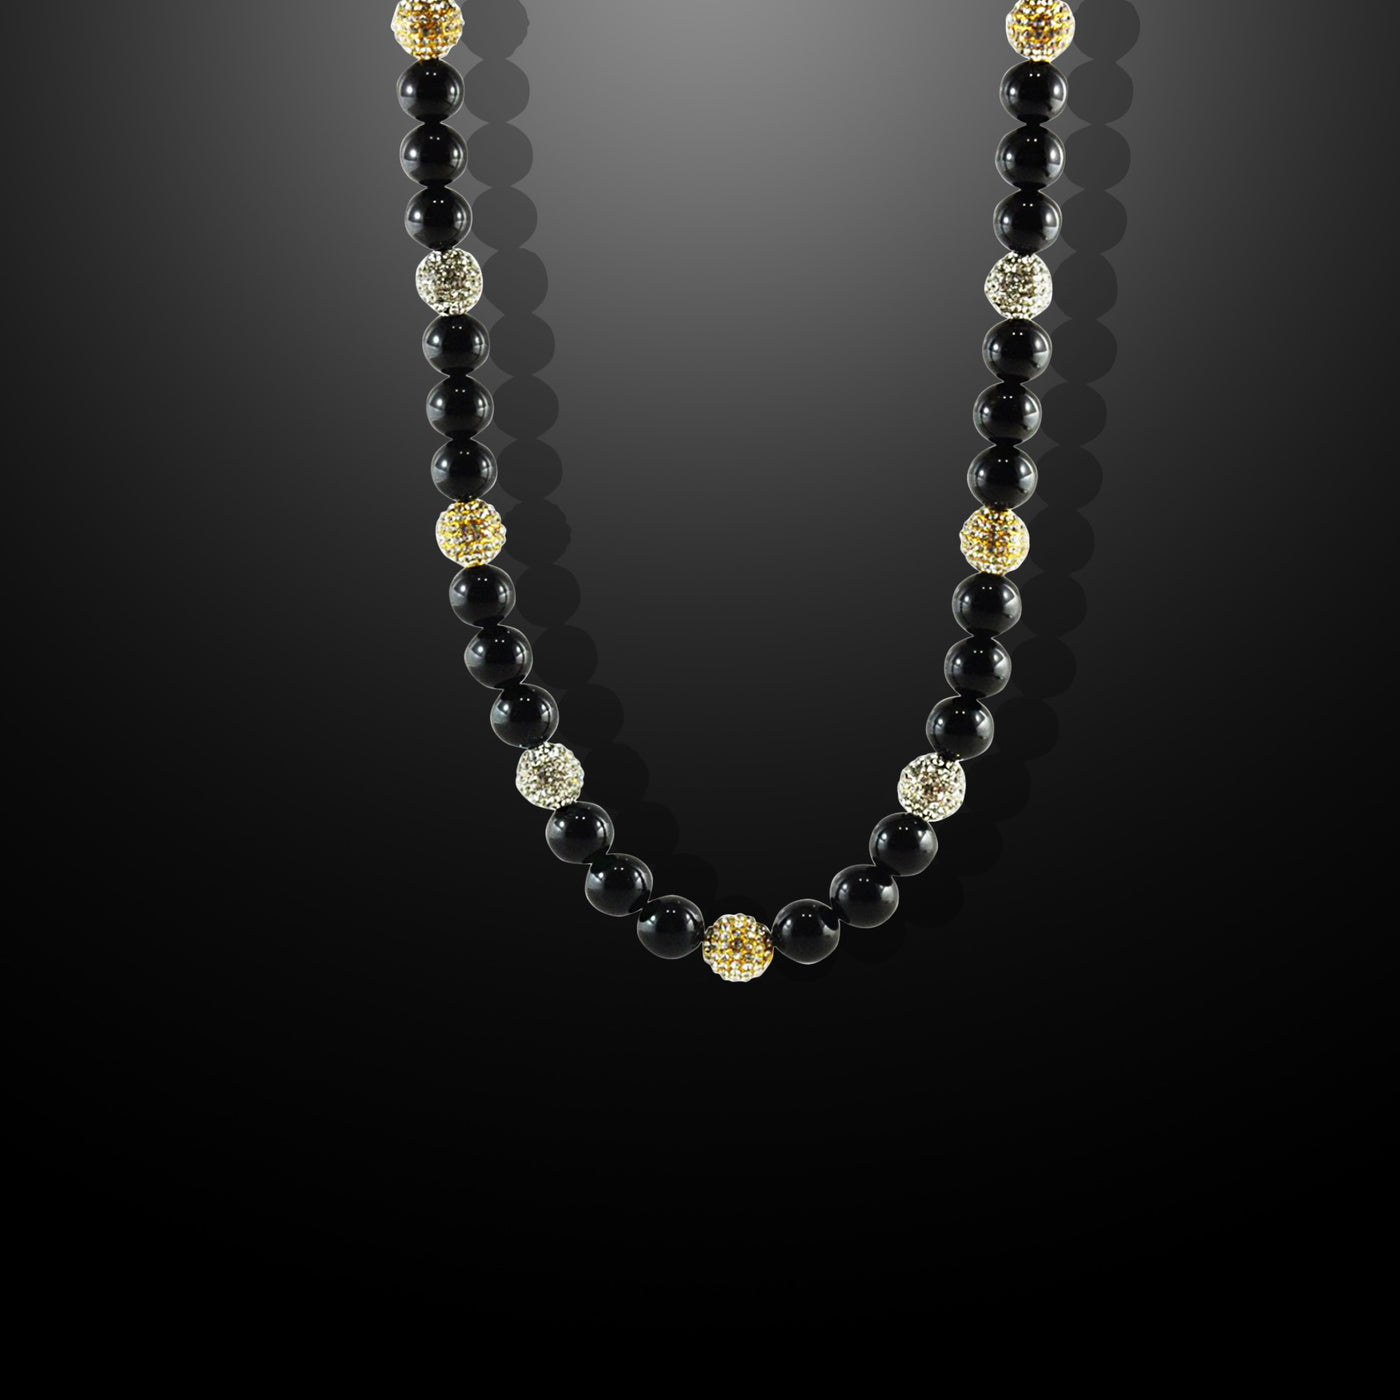 Royal Jewels Necklace with Black Agate and Pavé CZ Diamonds Beads